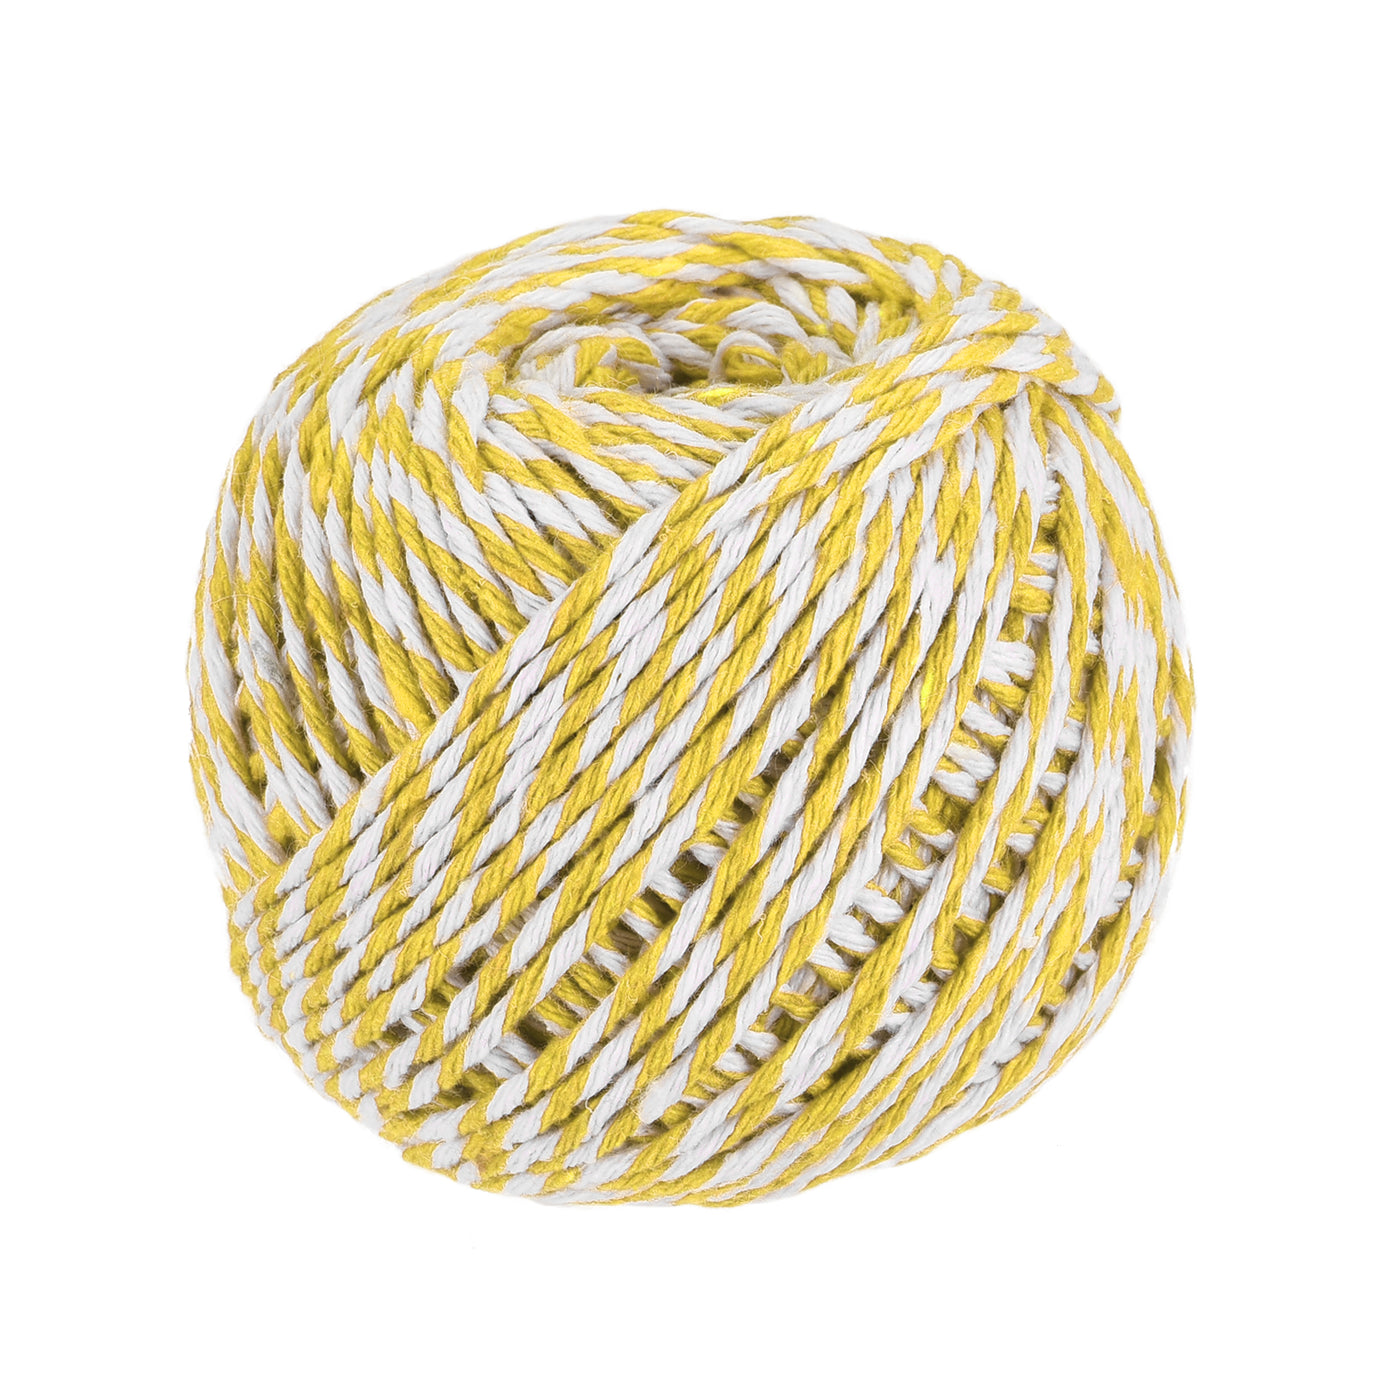 Twine Packing String Wrapping Cotton Twine 100M Orange and White Rope for  Gift Wrapping Twine 